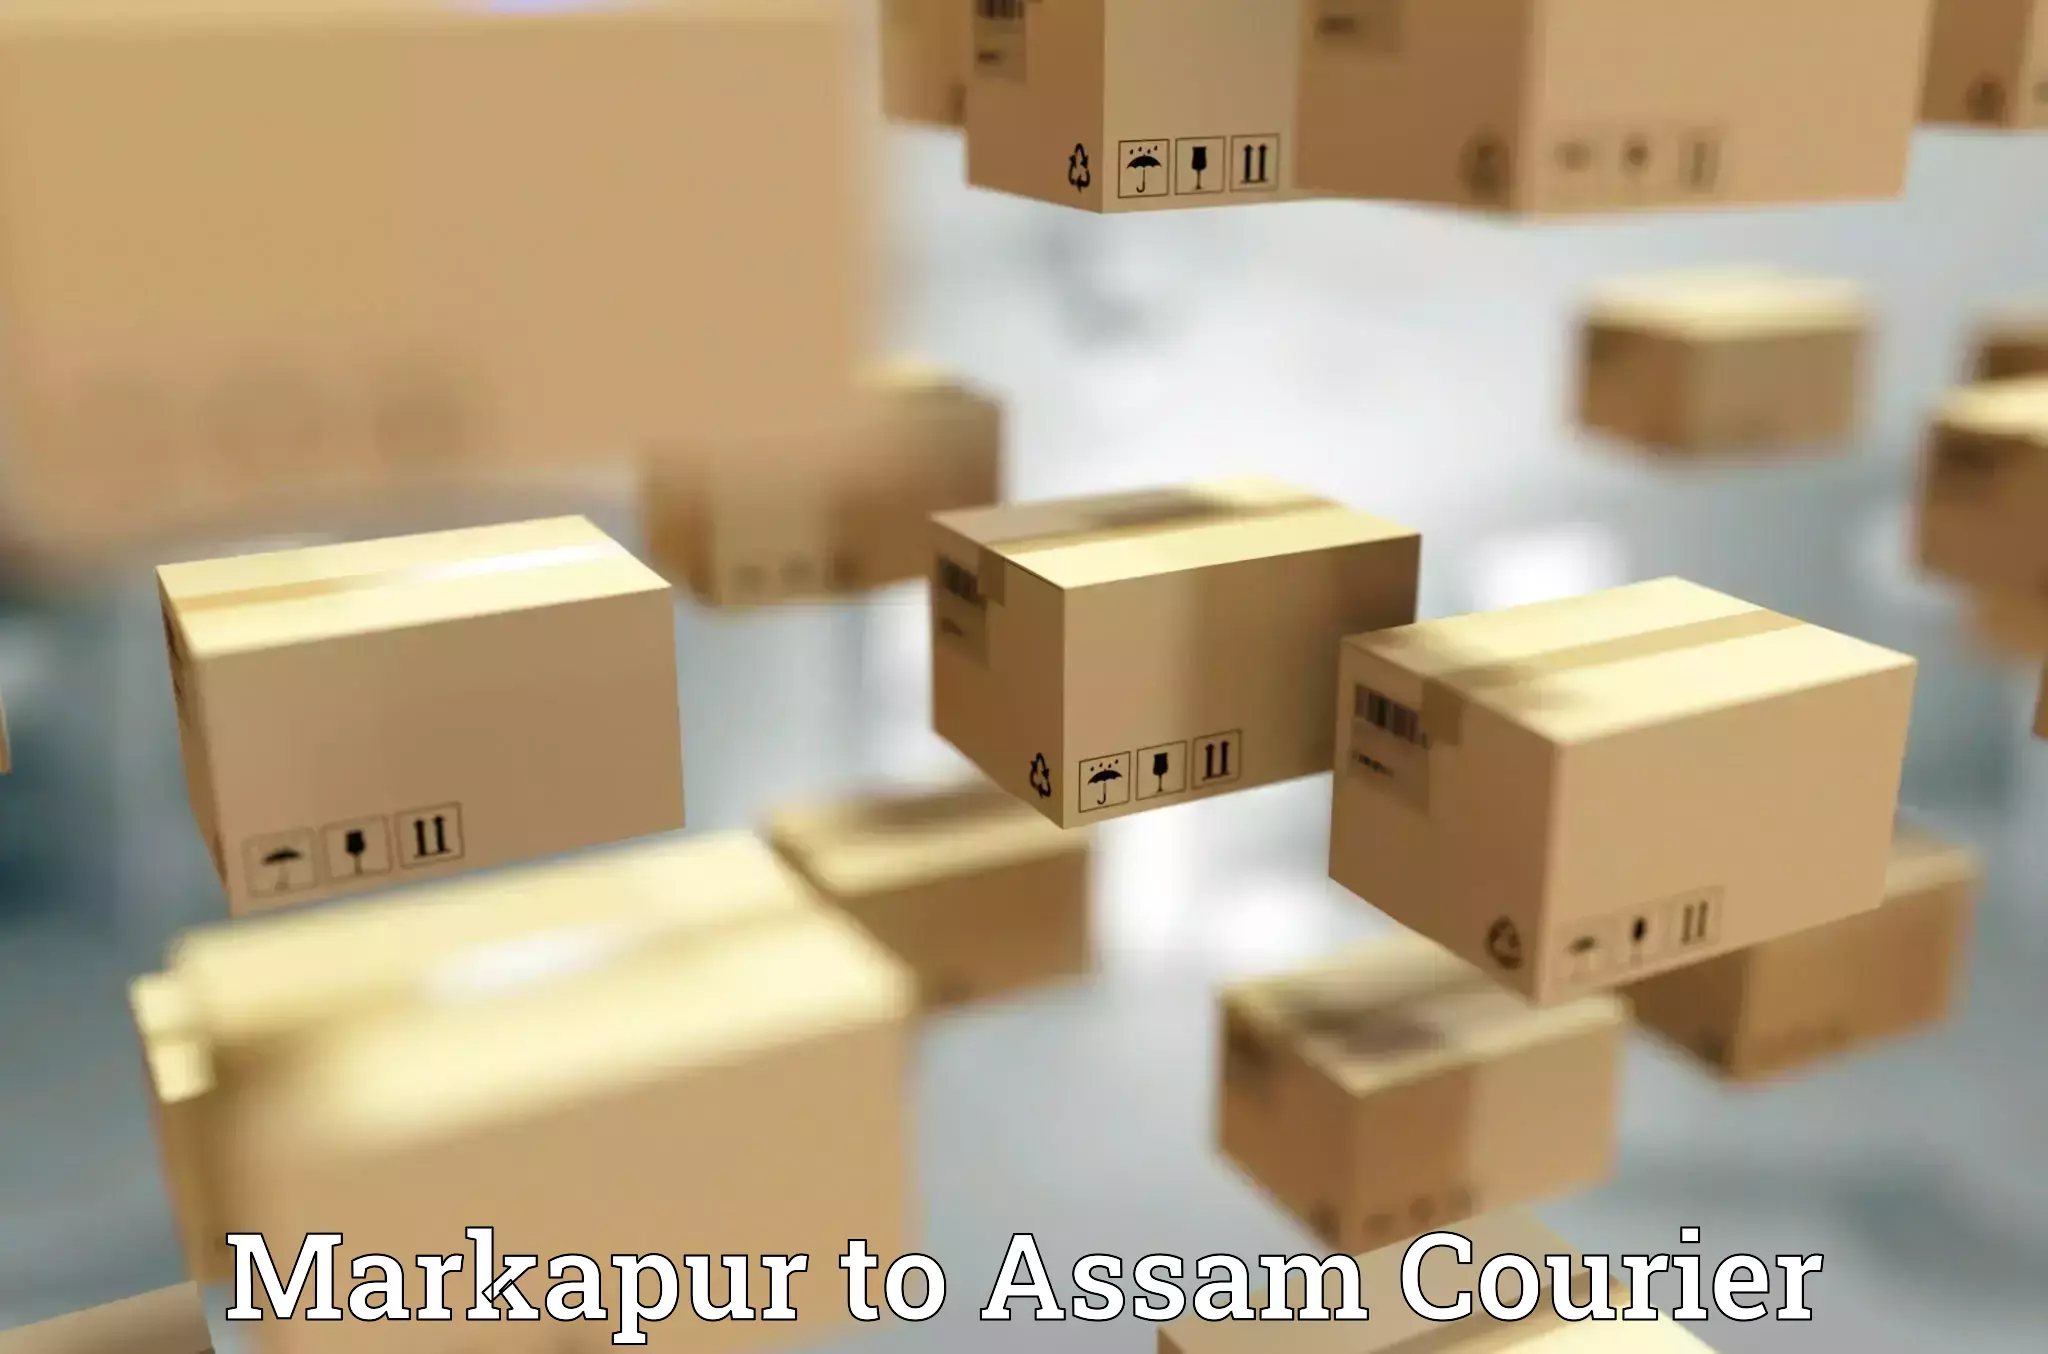 Global shipping solutions Markapur to Assam